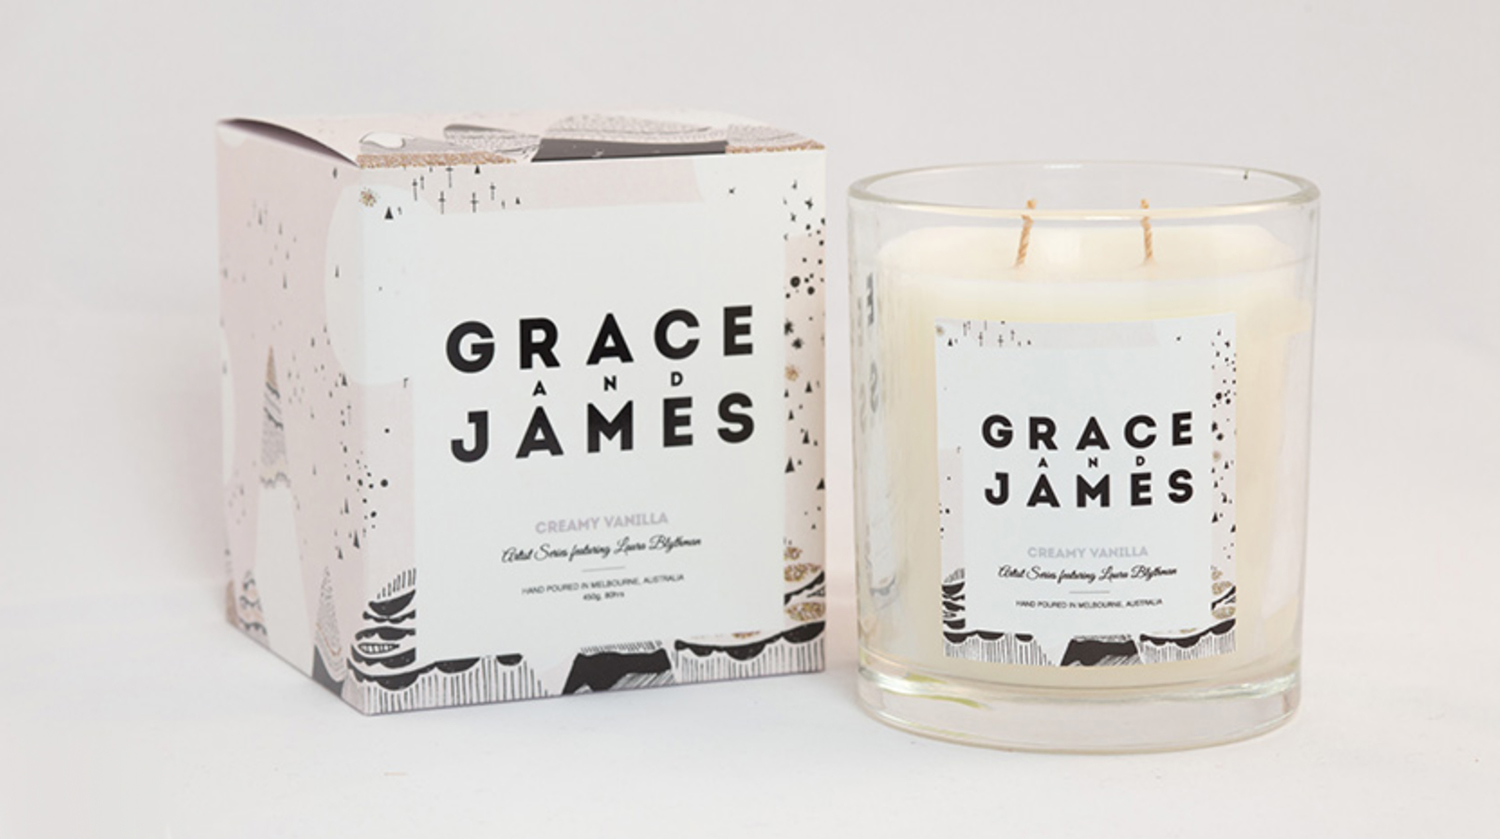 Grace and James Candle Packaging 2